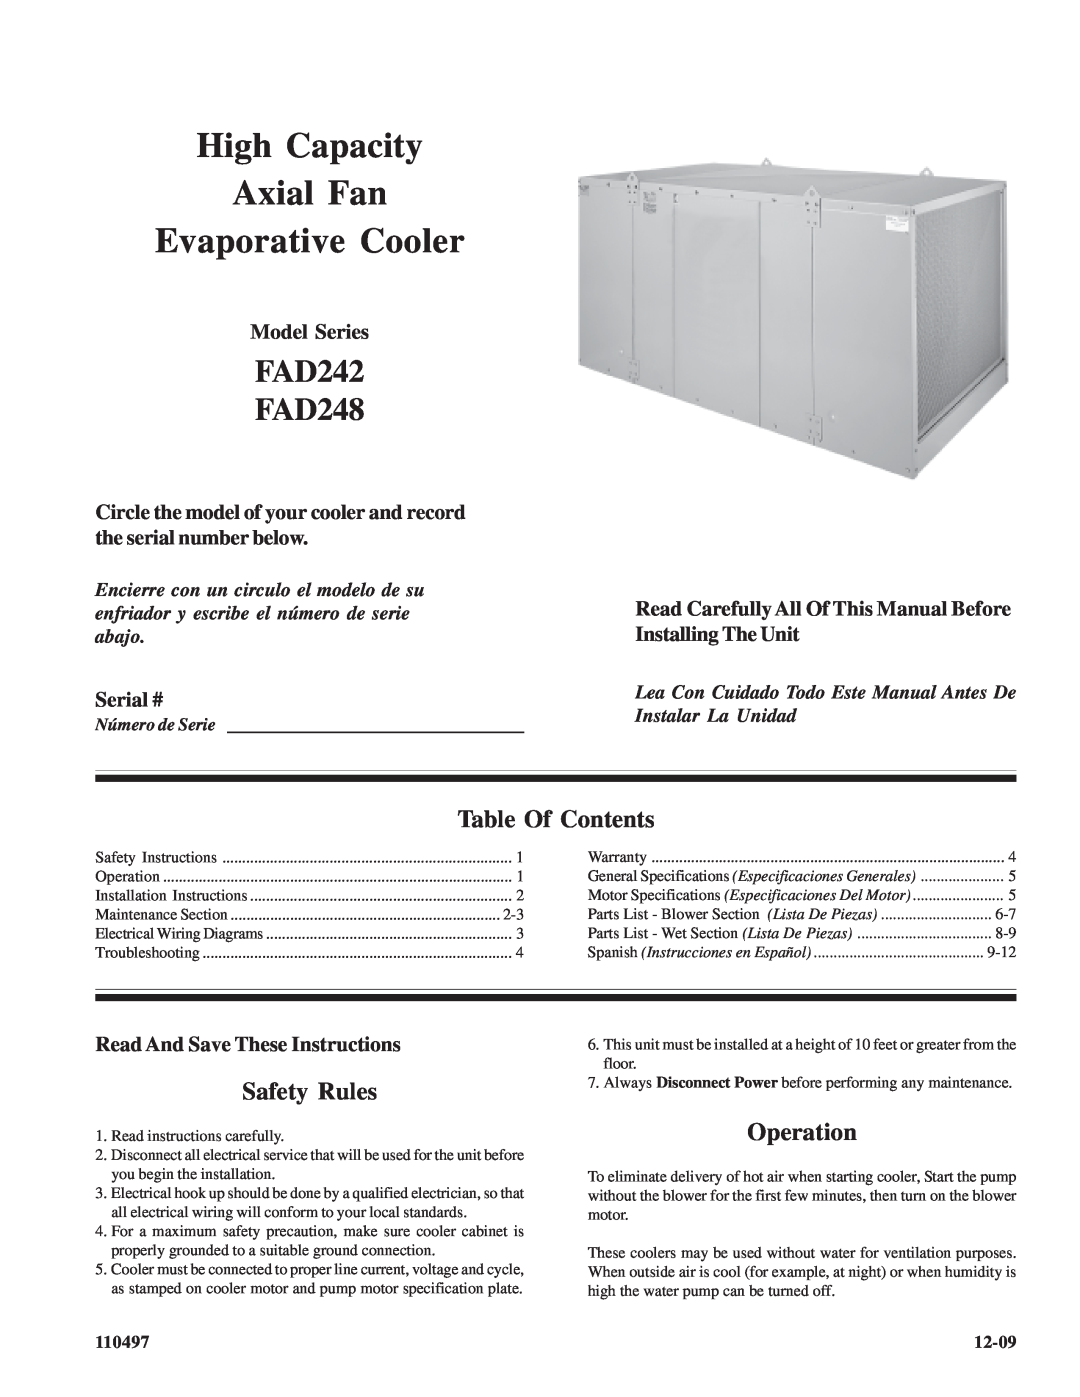 Essick Air FAD242, FAD248 installation instructions Table Of Contents, Safety Rules, Operation, Model Series, Serial # 